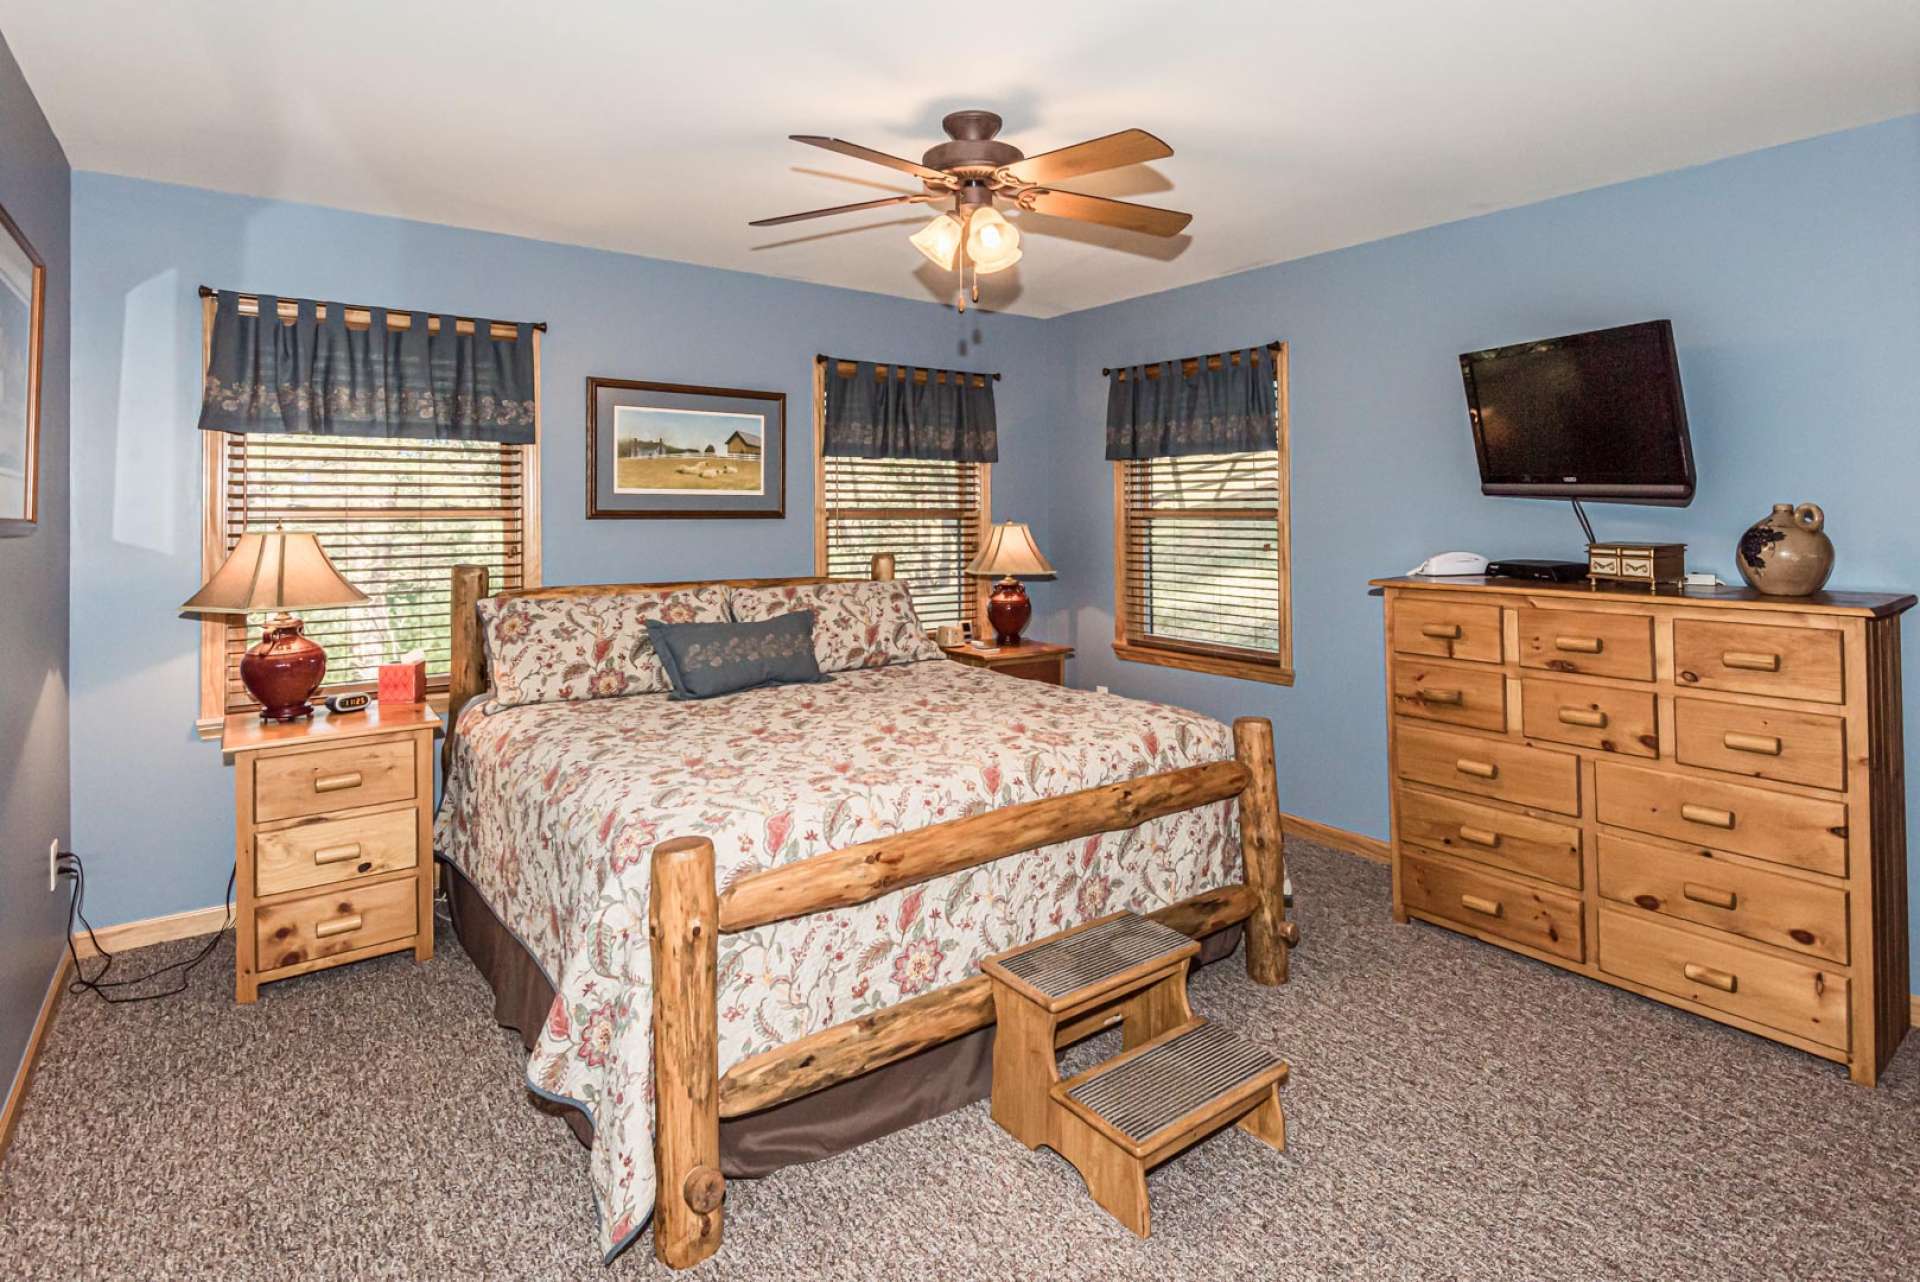 The master bedroom is conveniently located on the main level and offers a comfortable carpeted floor and plenty of windows filling the room with light.